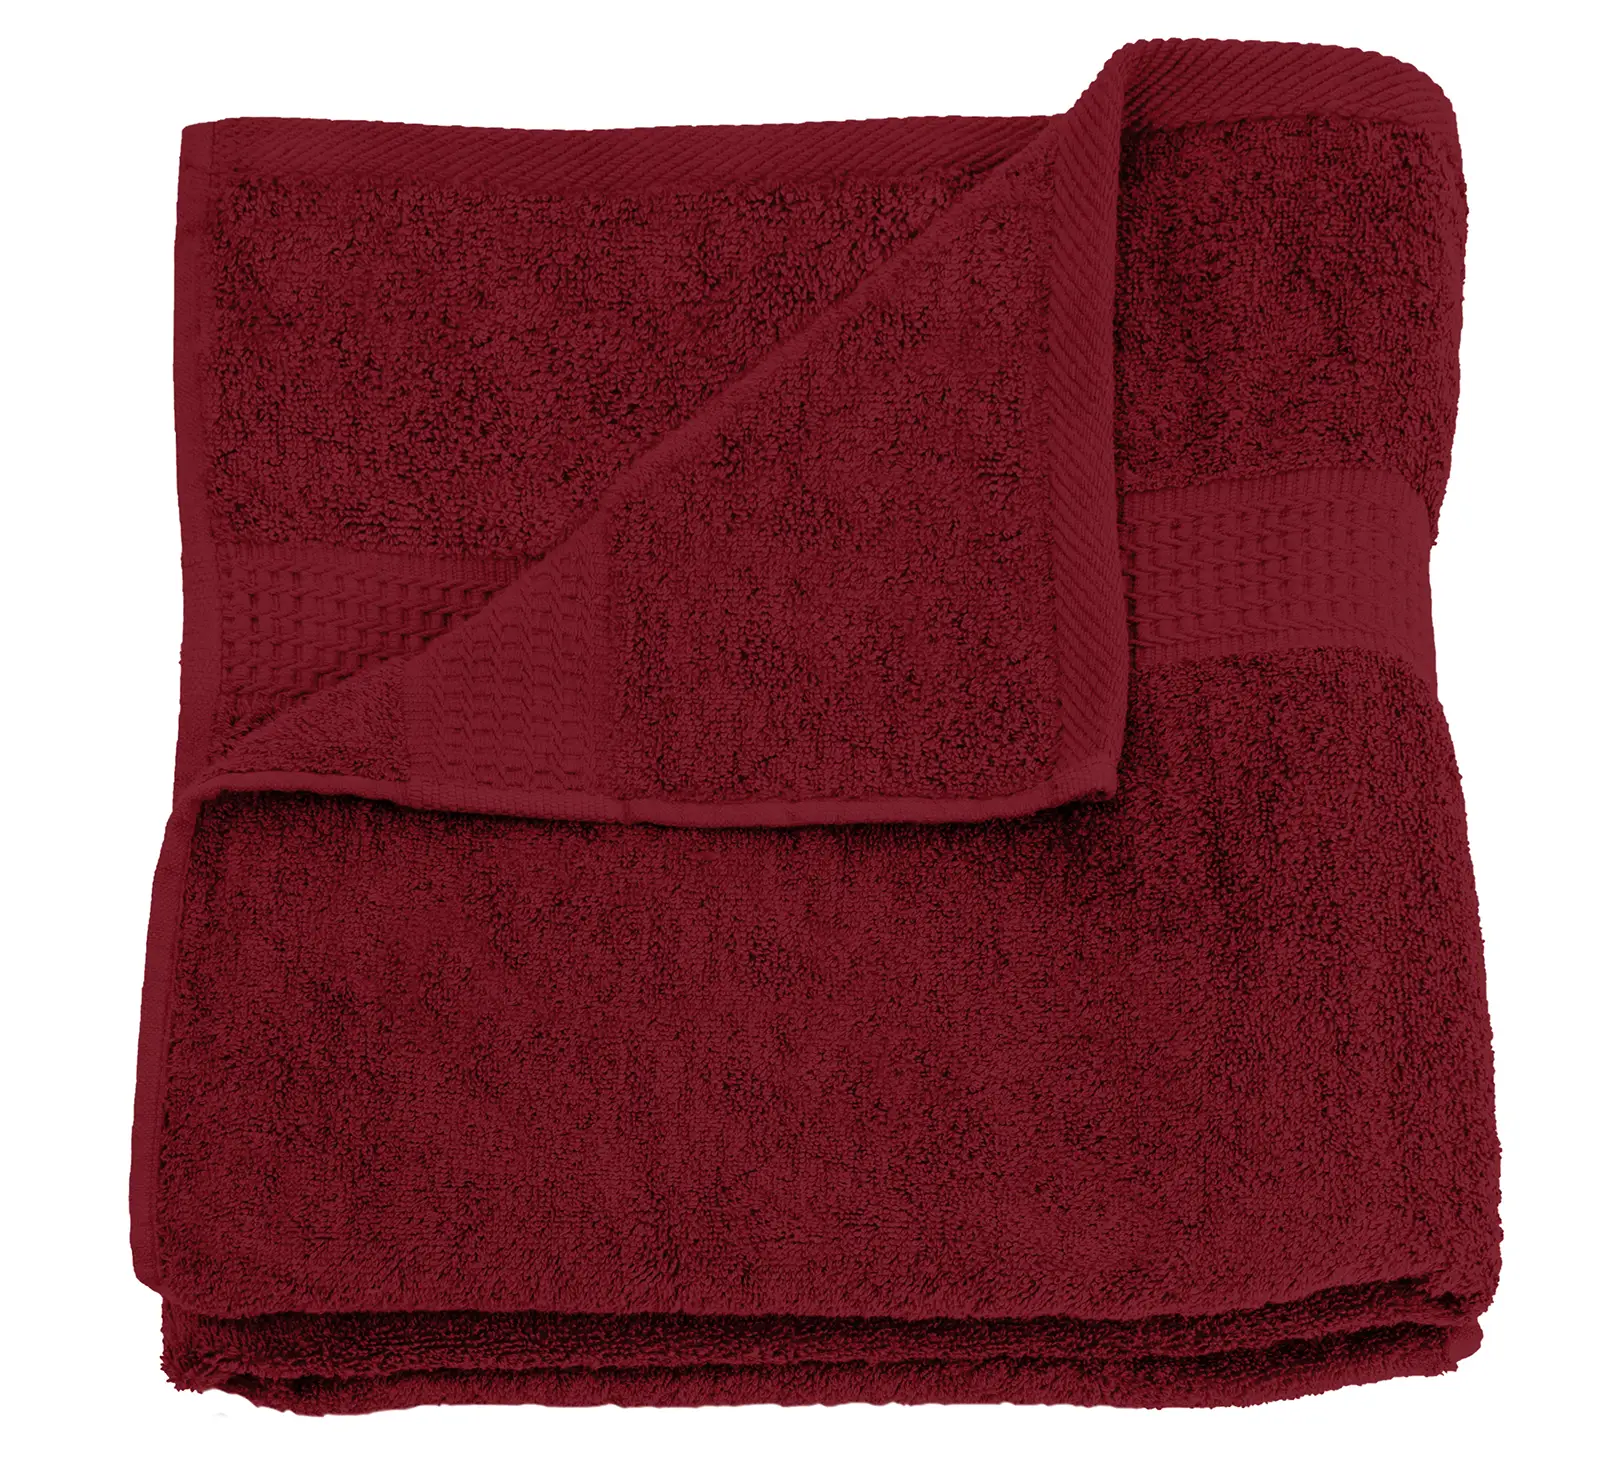 cm bordeaux Badetuch 100x150 Frottee